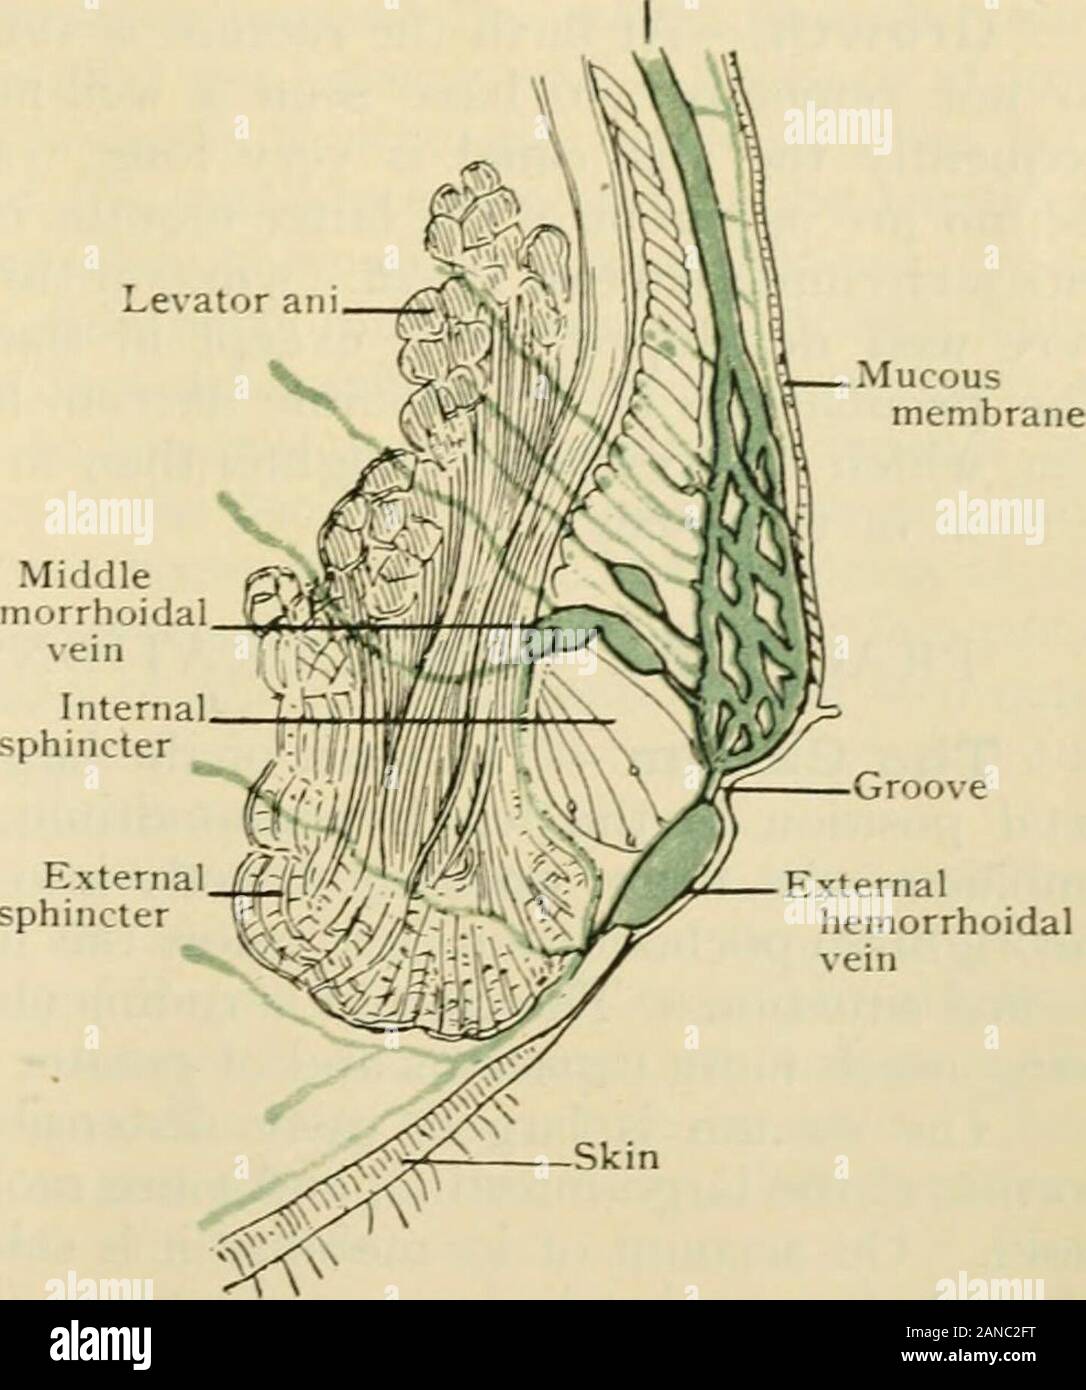 Human anatomy, including structure and development and practical considerations . above theboundary line. Vessels may be receied also from the sacra media. The middlehemorrhoidal arteries, of uncertain origin and distribution, rarely give any consider-able supply to the gut. The inferior hemorrhoidals—two or three small branchesfrom the internal pudic—supply chiefly the external sphincter, but also form a num-ber of fine anastomoses with the superior hemorrhoidal artery. The general dis-tribution of the veiiis is not very different from that of the arteries. The superiorhemorrhoidal veins, tr Stock Photo